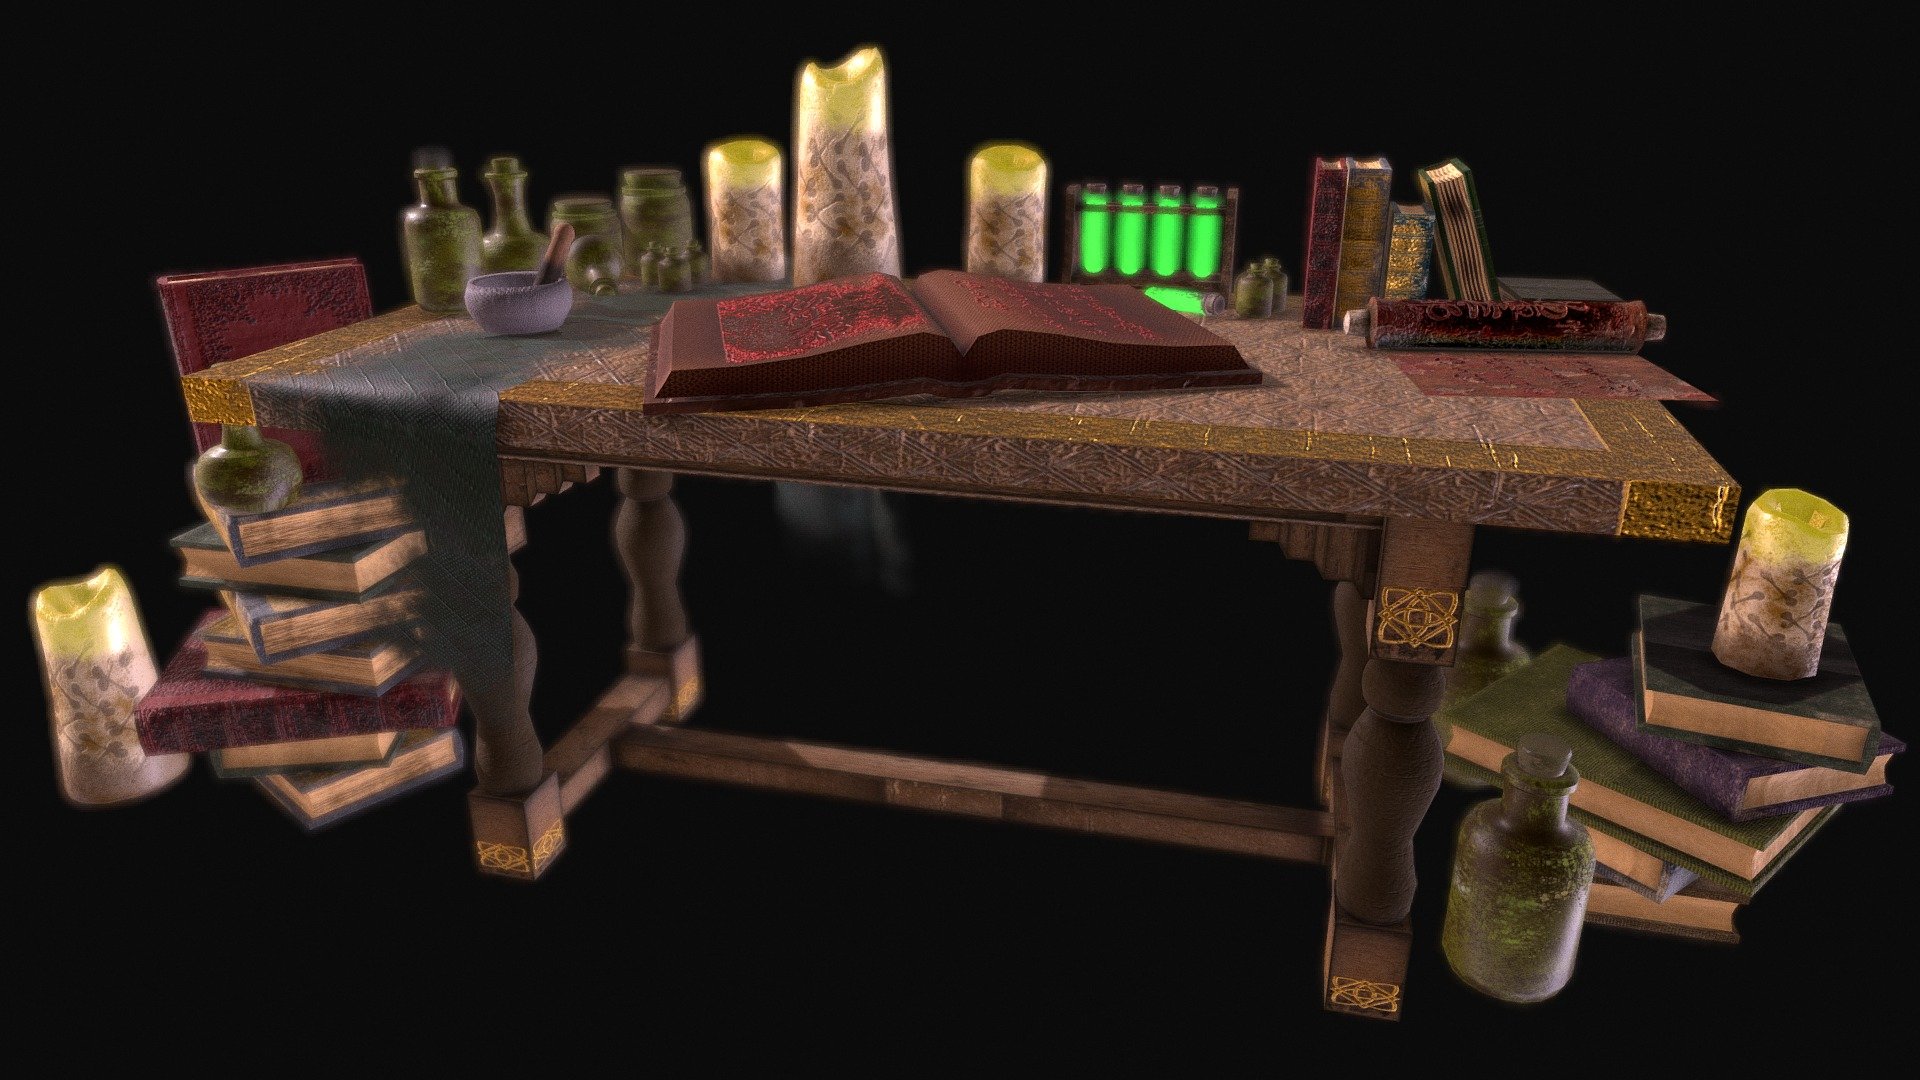 Pirate Table - 3D model by chrisstahlart [a914b41] - Sketchfab